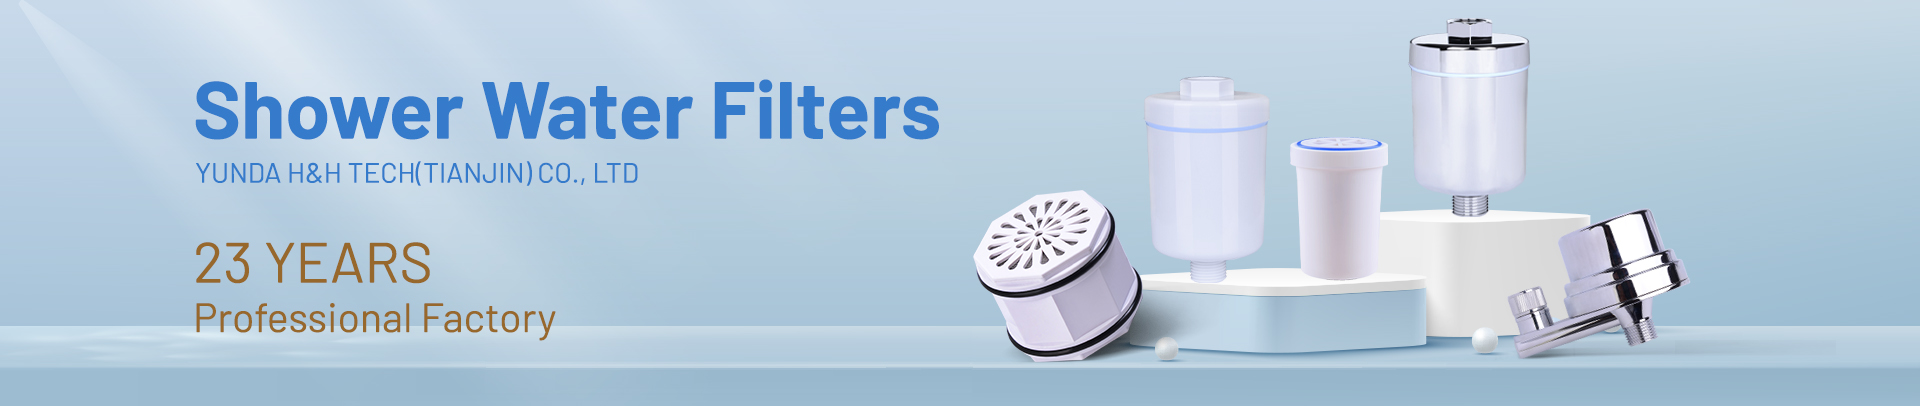 Shower Water Filters